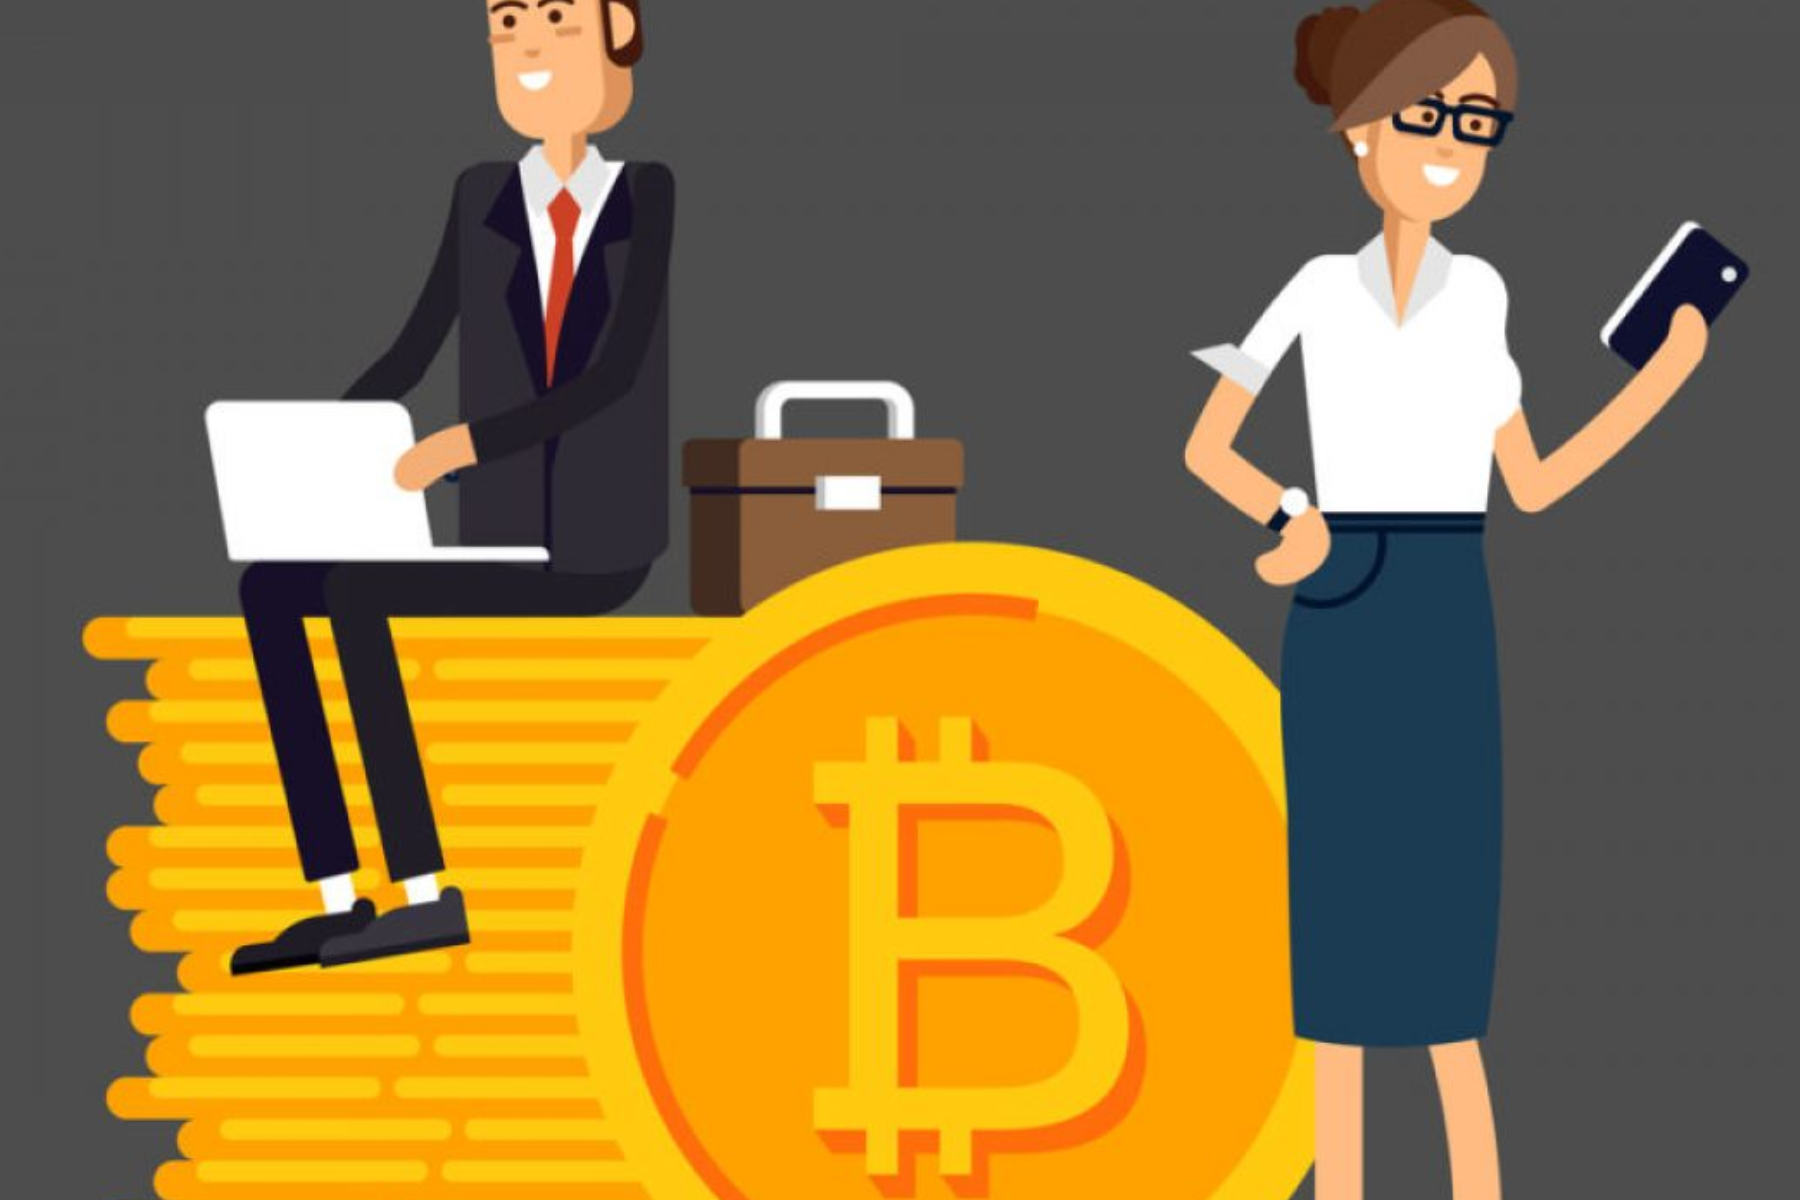 A man and a woman in business attire using their electronic devices. The man is seated on a pile of Bitcoins